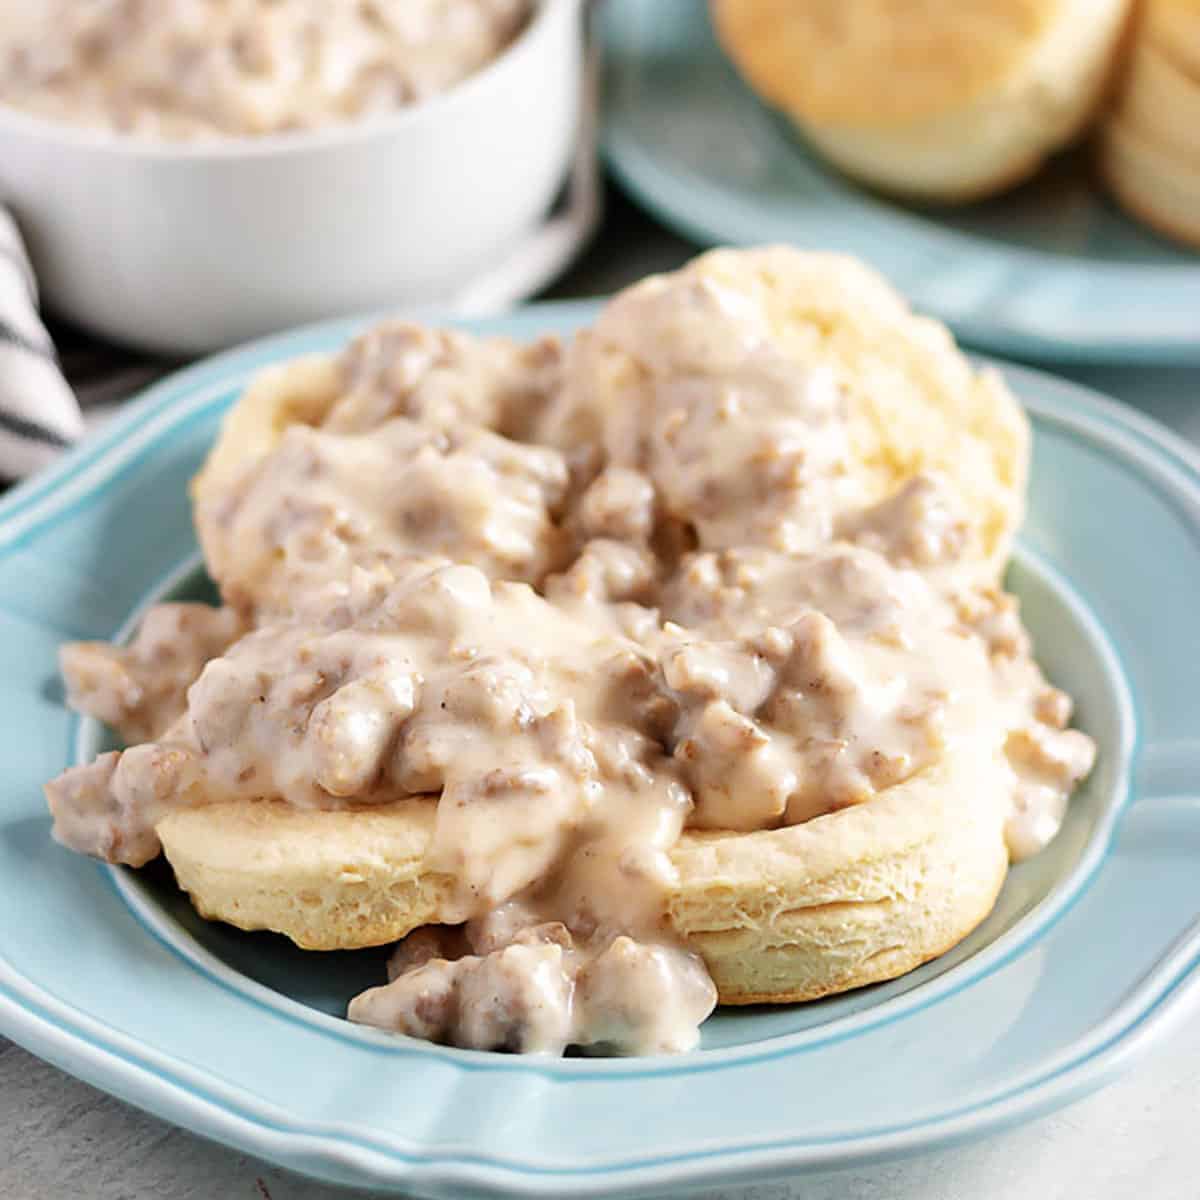 Biscuits and sausage gravy on a blue plate.